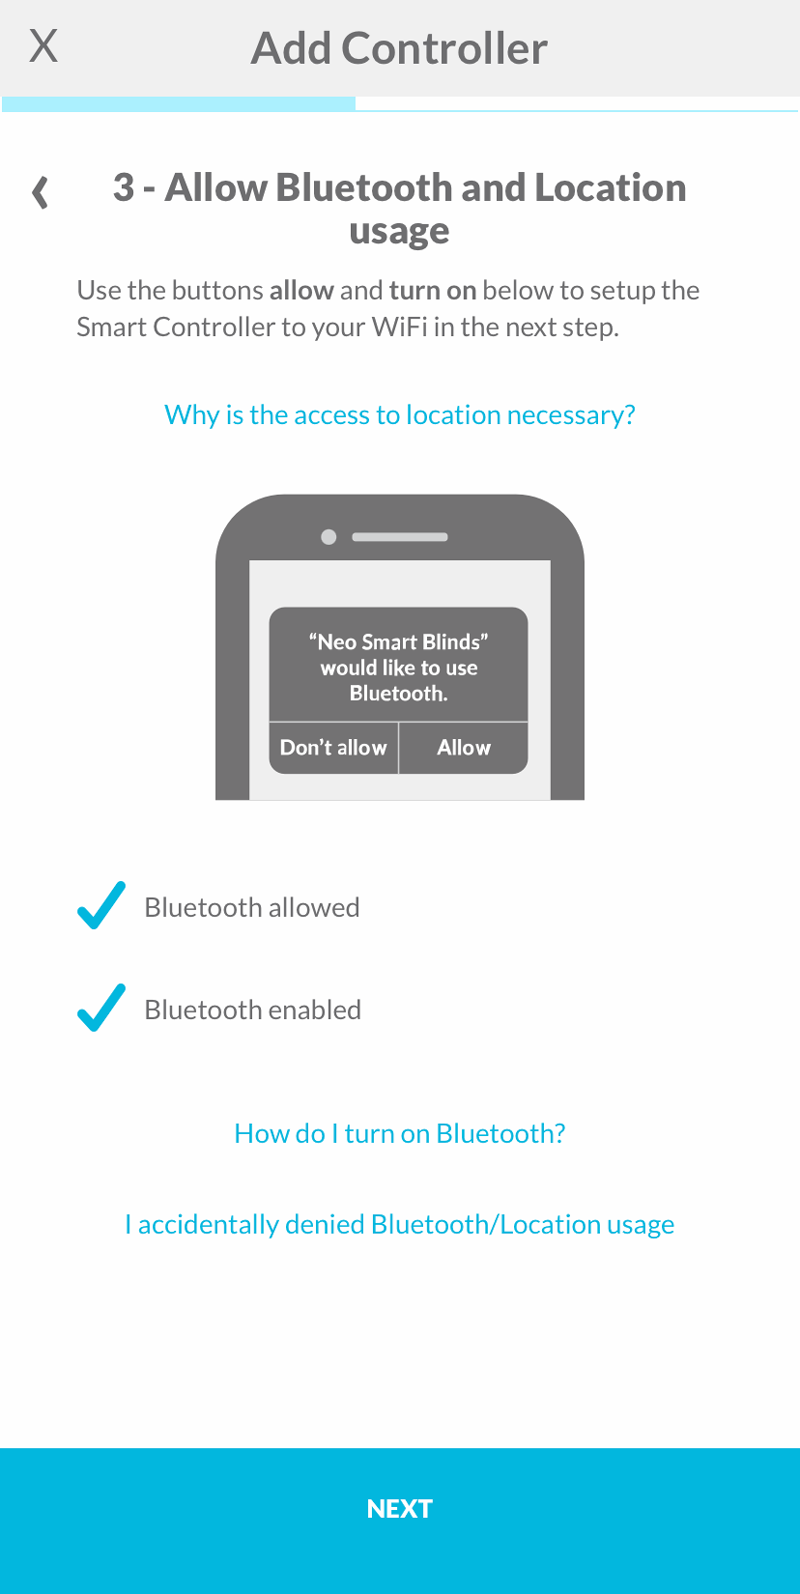 App showing Bluetooth usage was allowed and blutooth is enabled